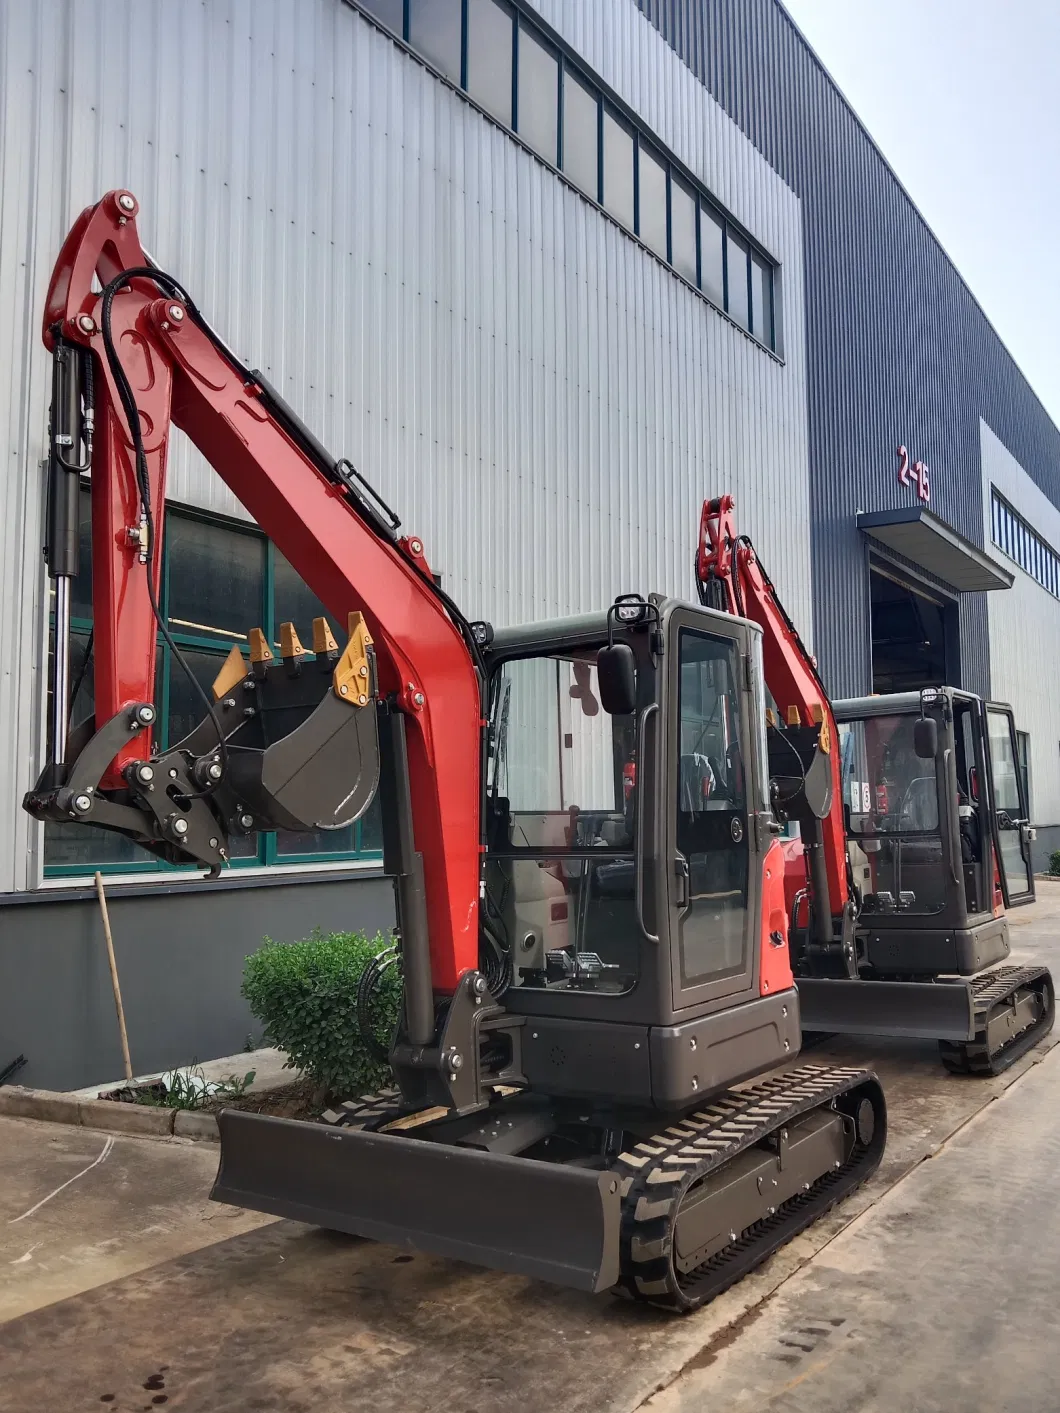 Diesel Hydraulic Crawler Excavator 2.7 Ton with Cab, Plunger Pump, Large Arm Side Sway, High and Low Speed Mini Excavator